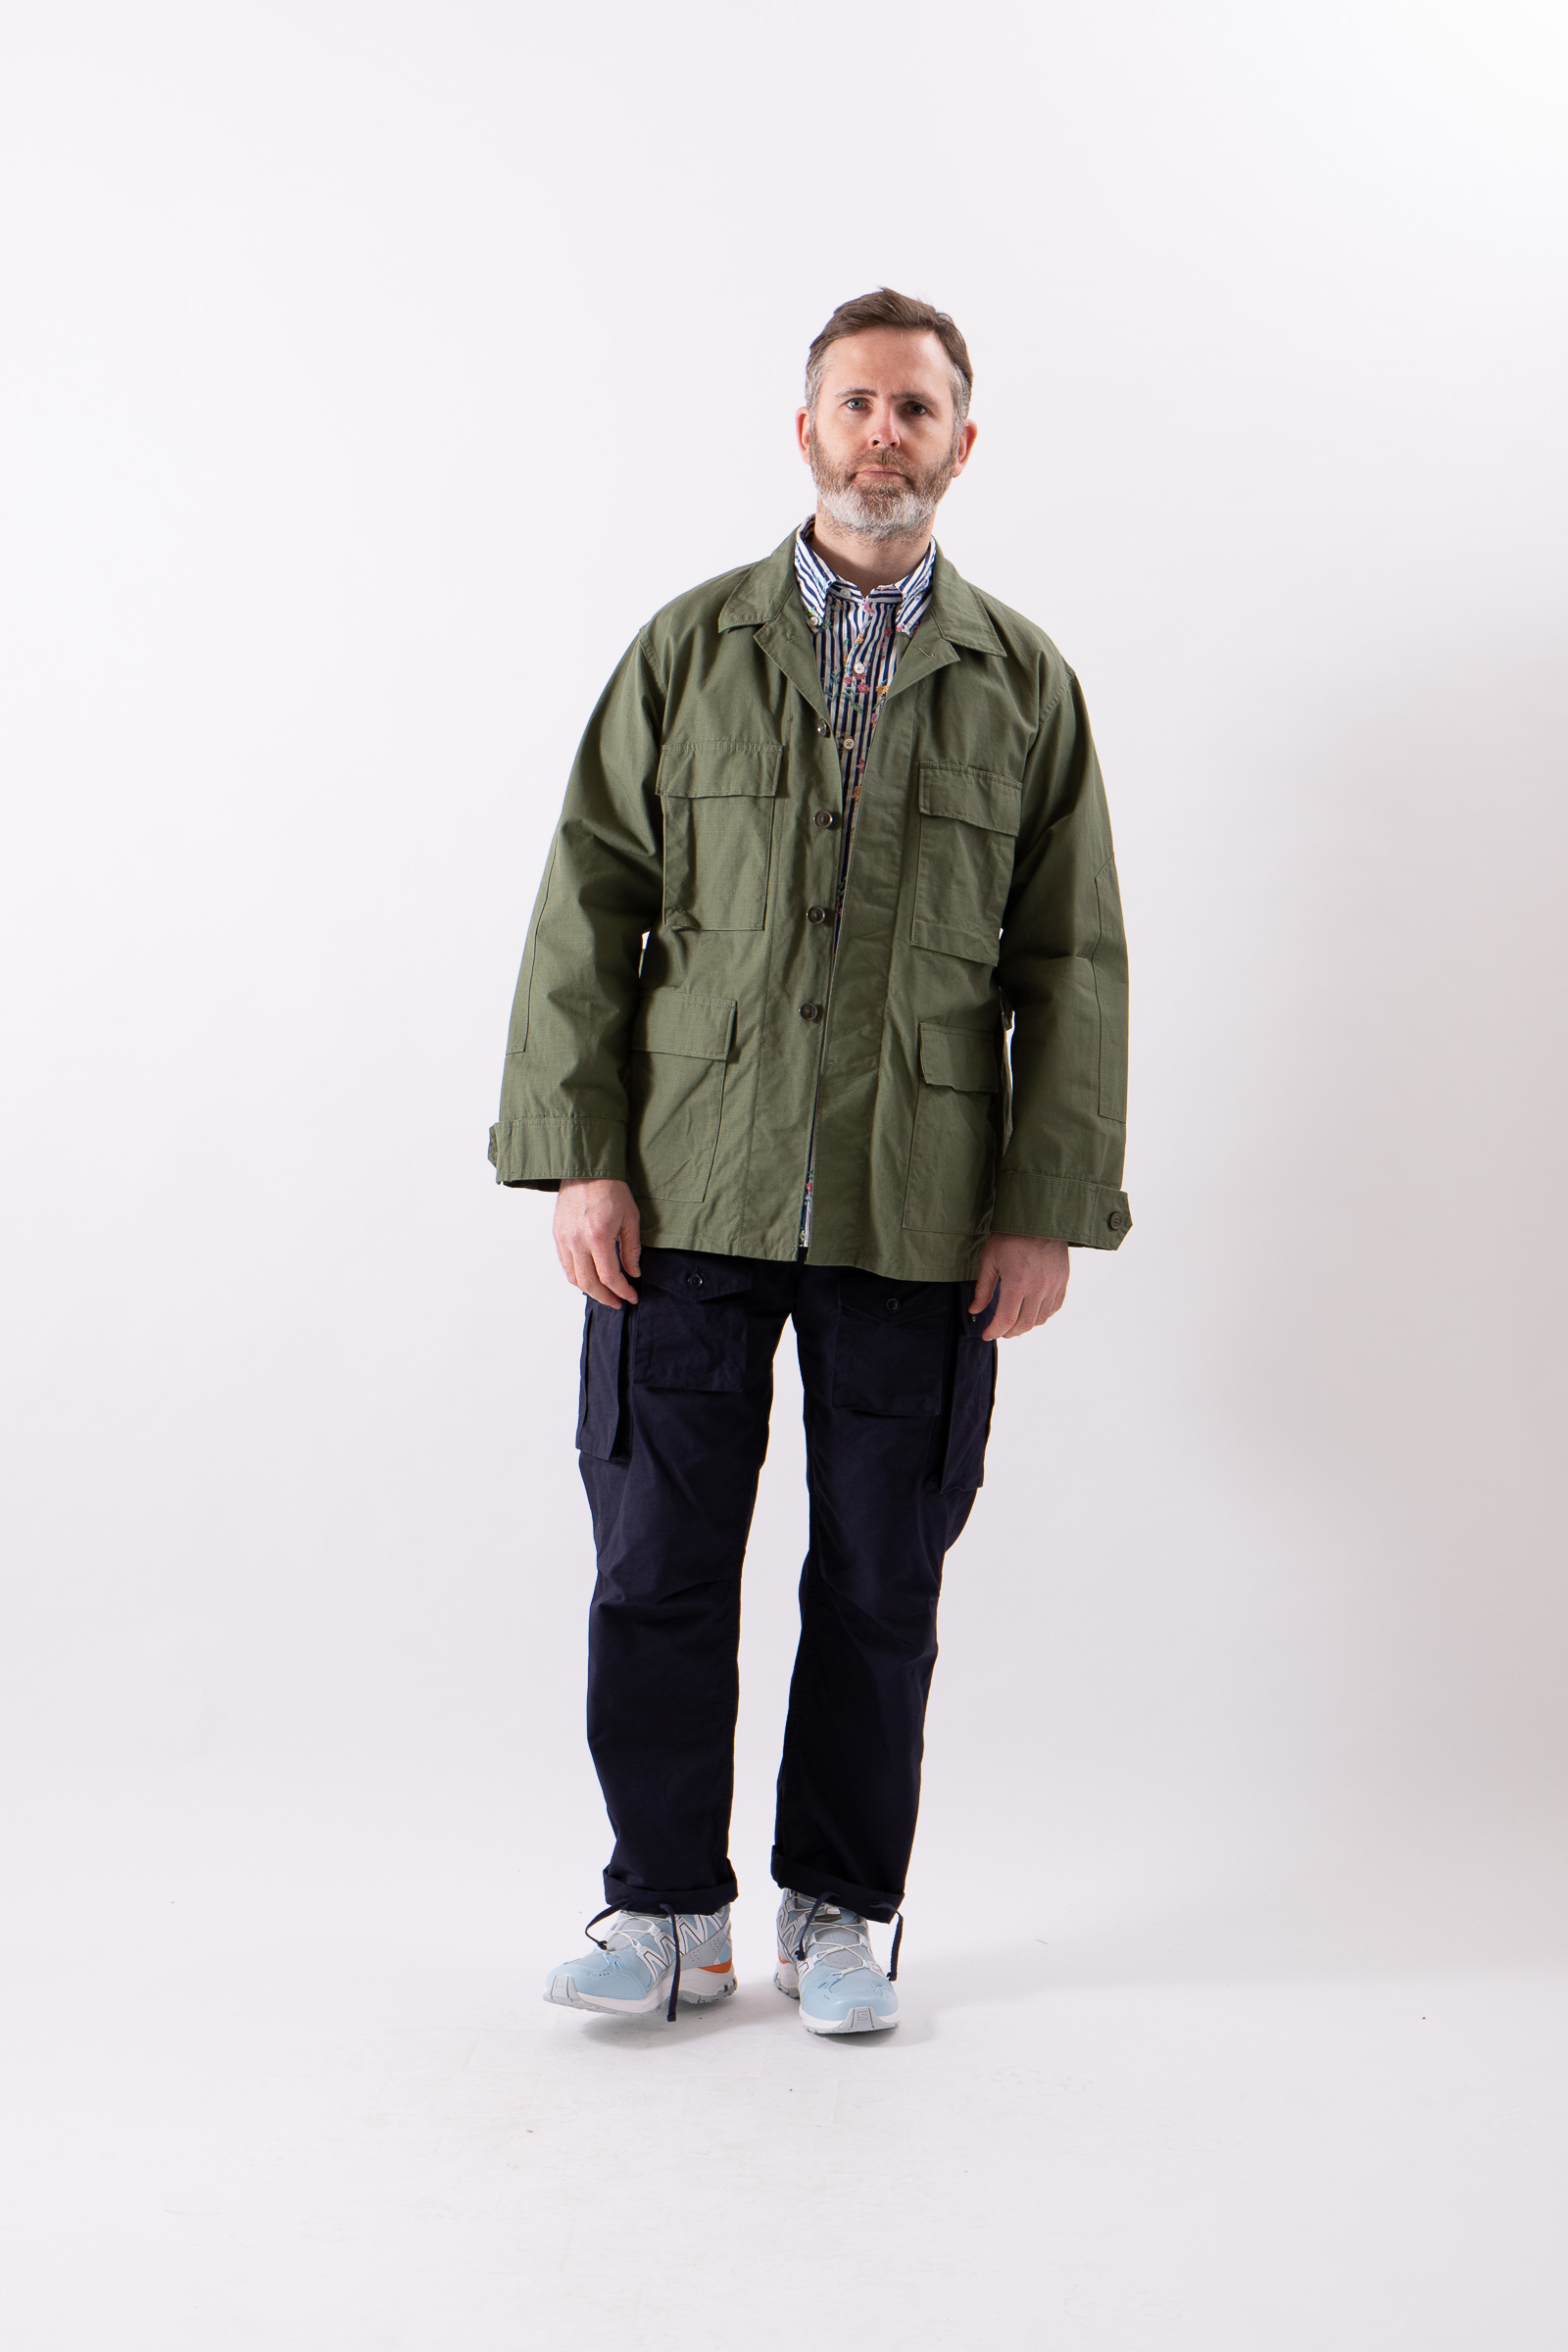 ENGINEERED GARMENTS SS20 DELIVERY 1 - The Bureau Belfast